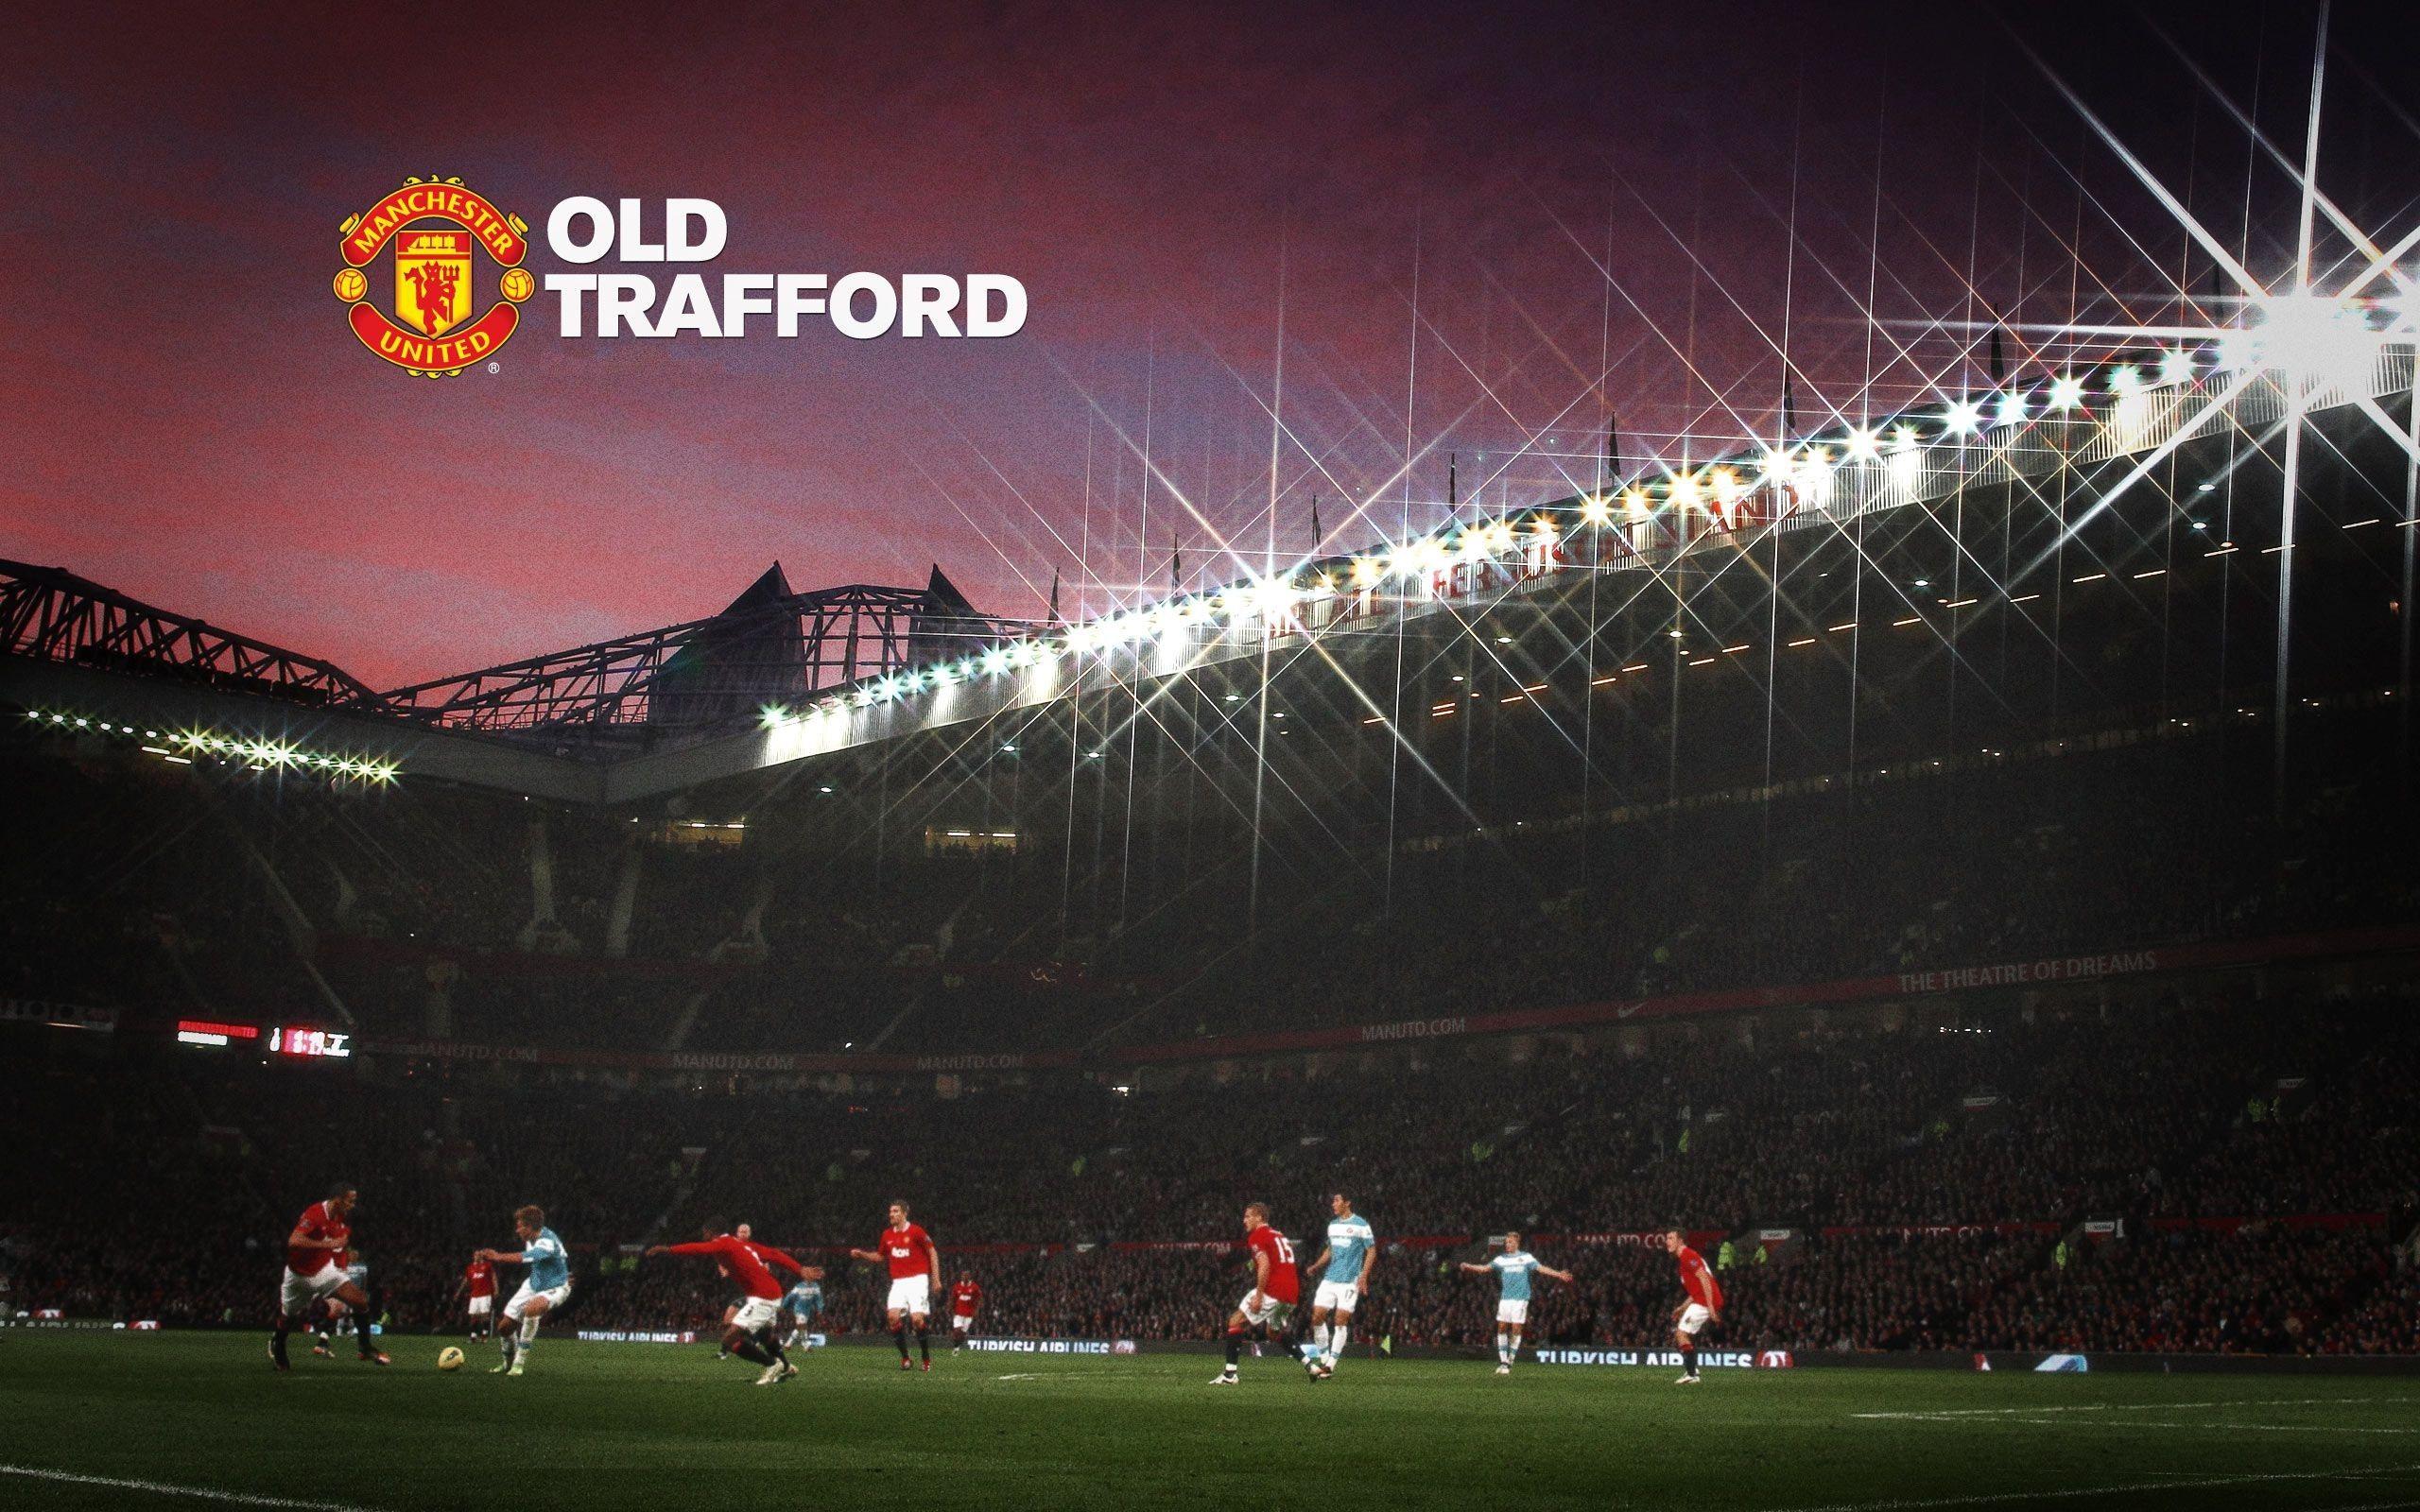 Manchester United Desktop Wallpapers Top Free Manchester United Desktop Backgrounds